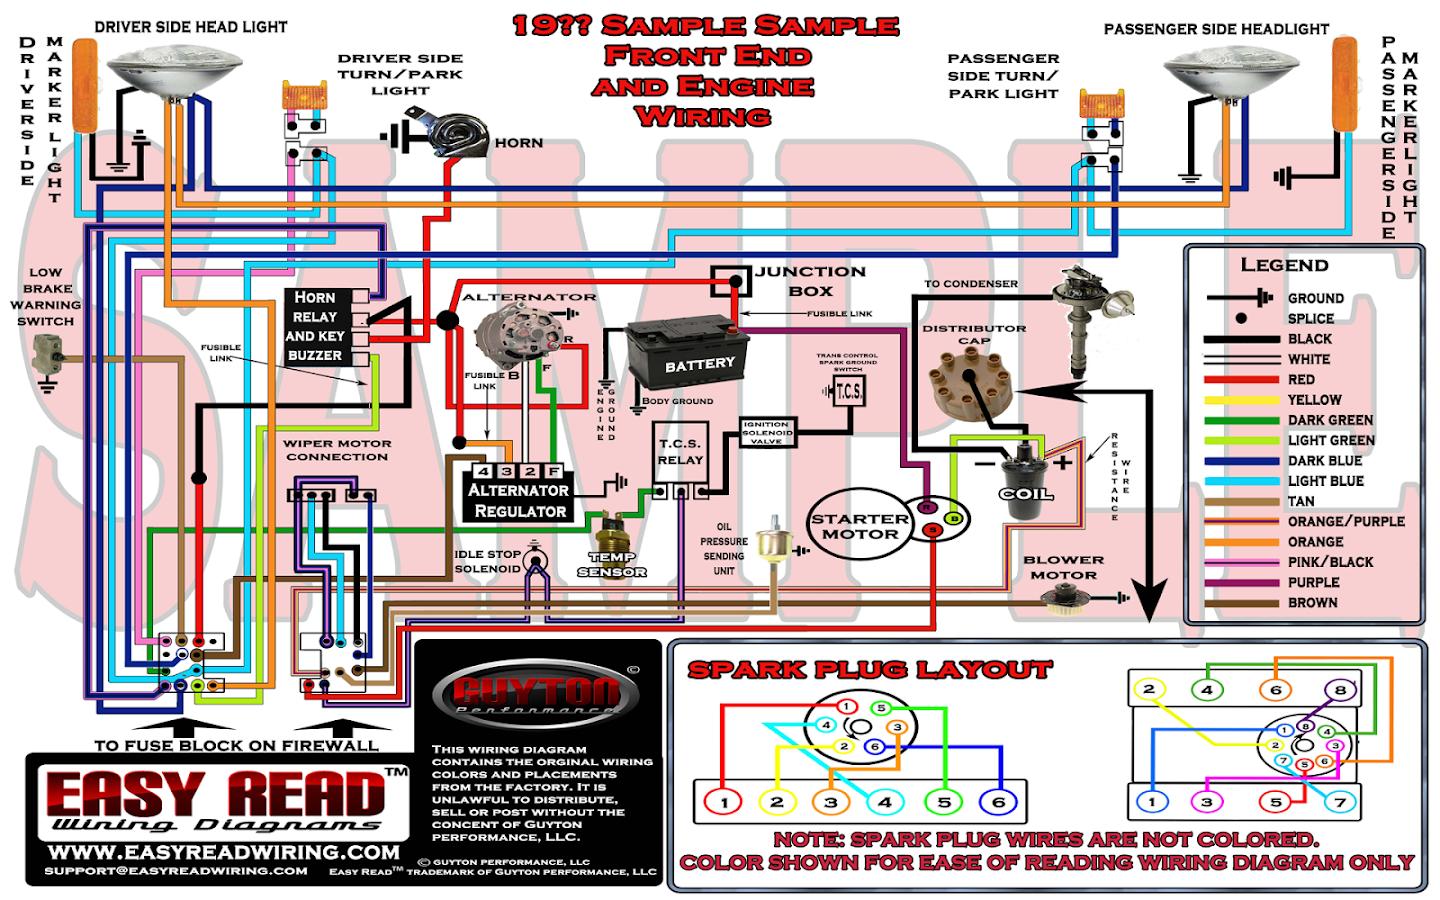 68 Camaro Ignition Switch Wiring Diagram from static1.pt-content.com